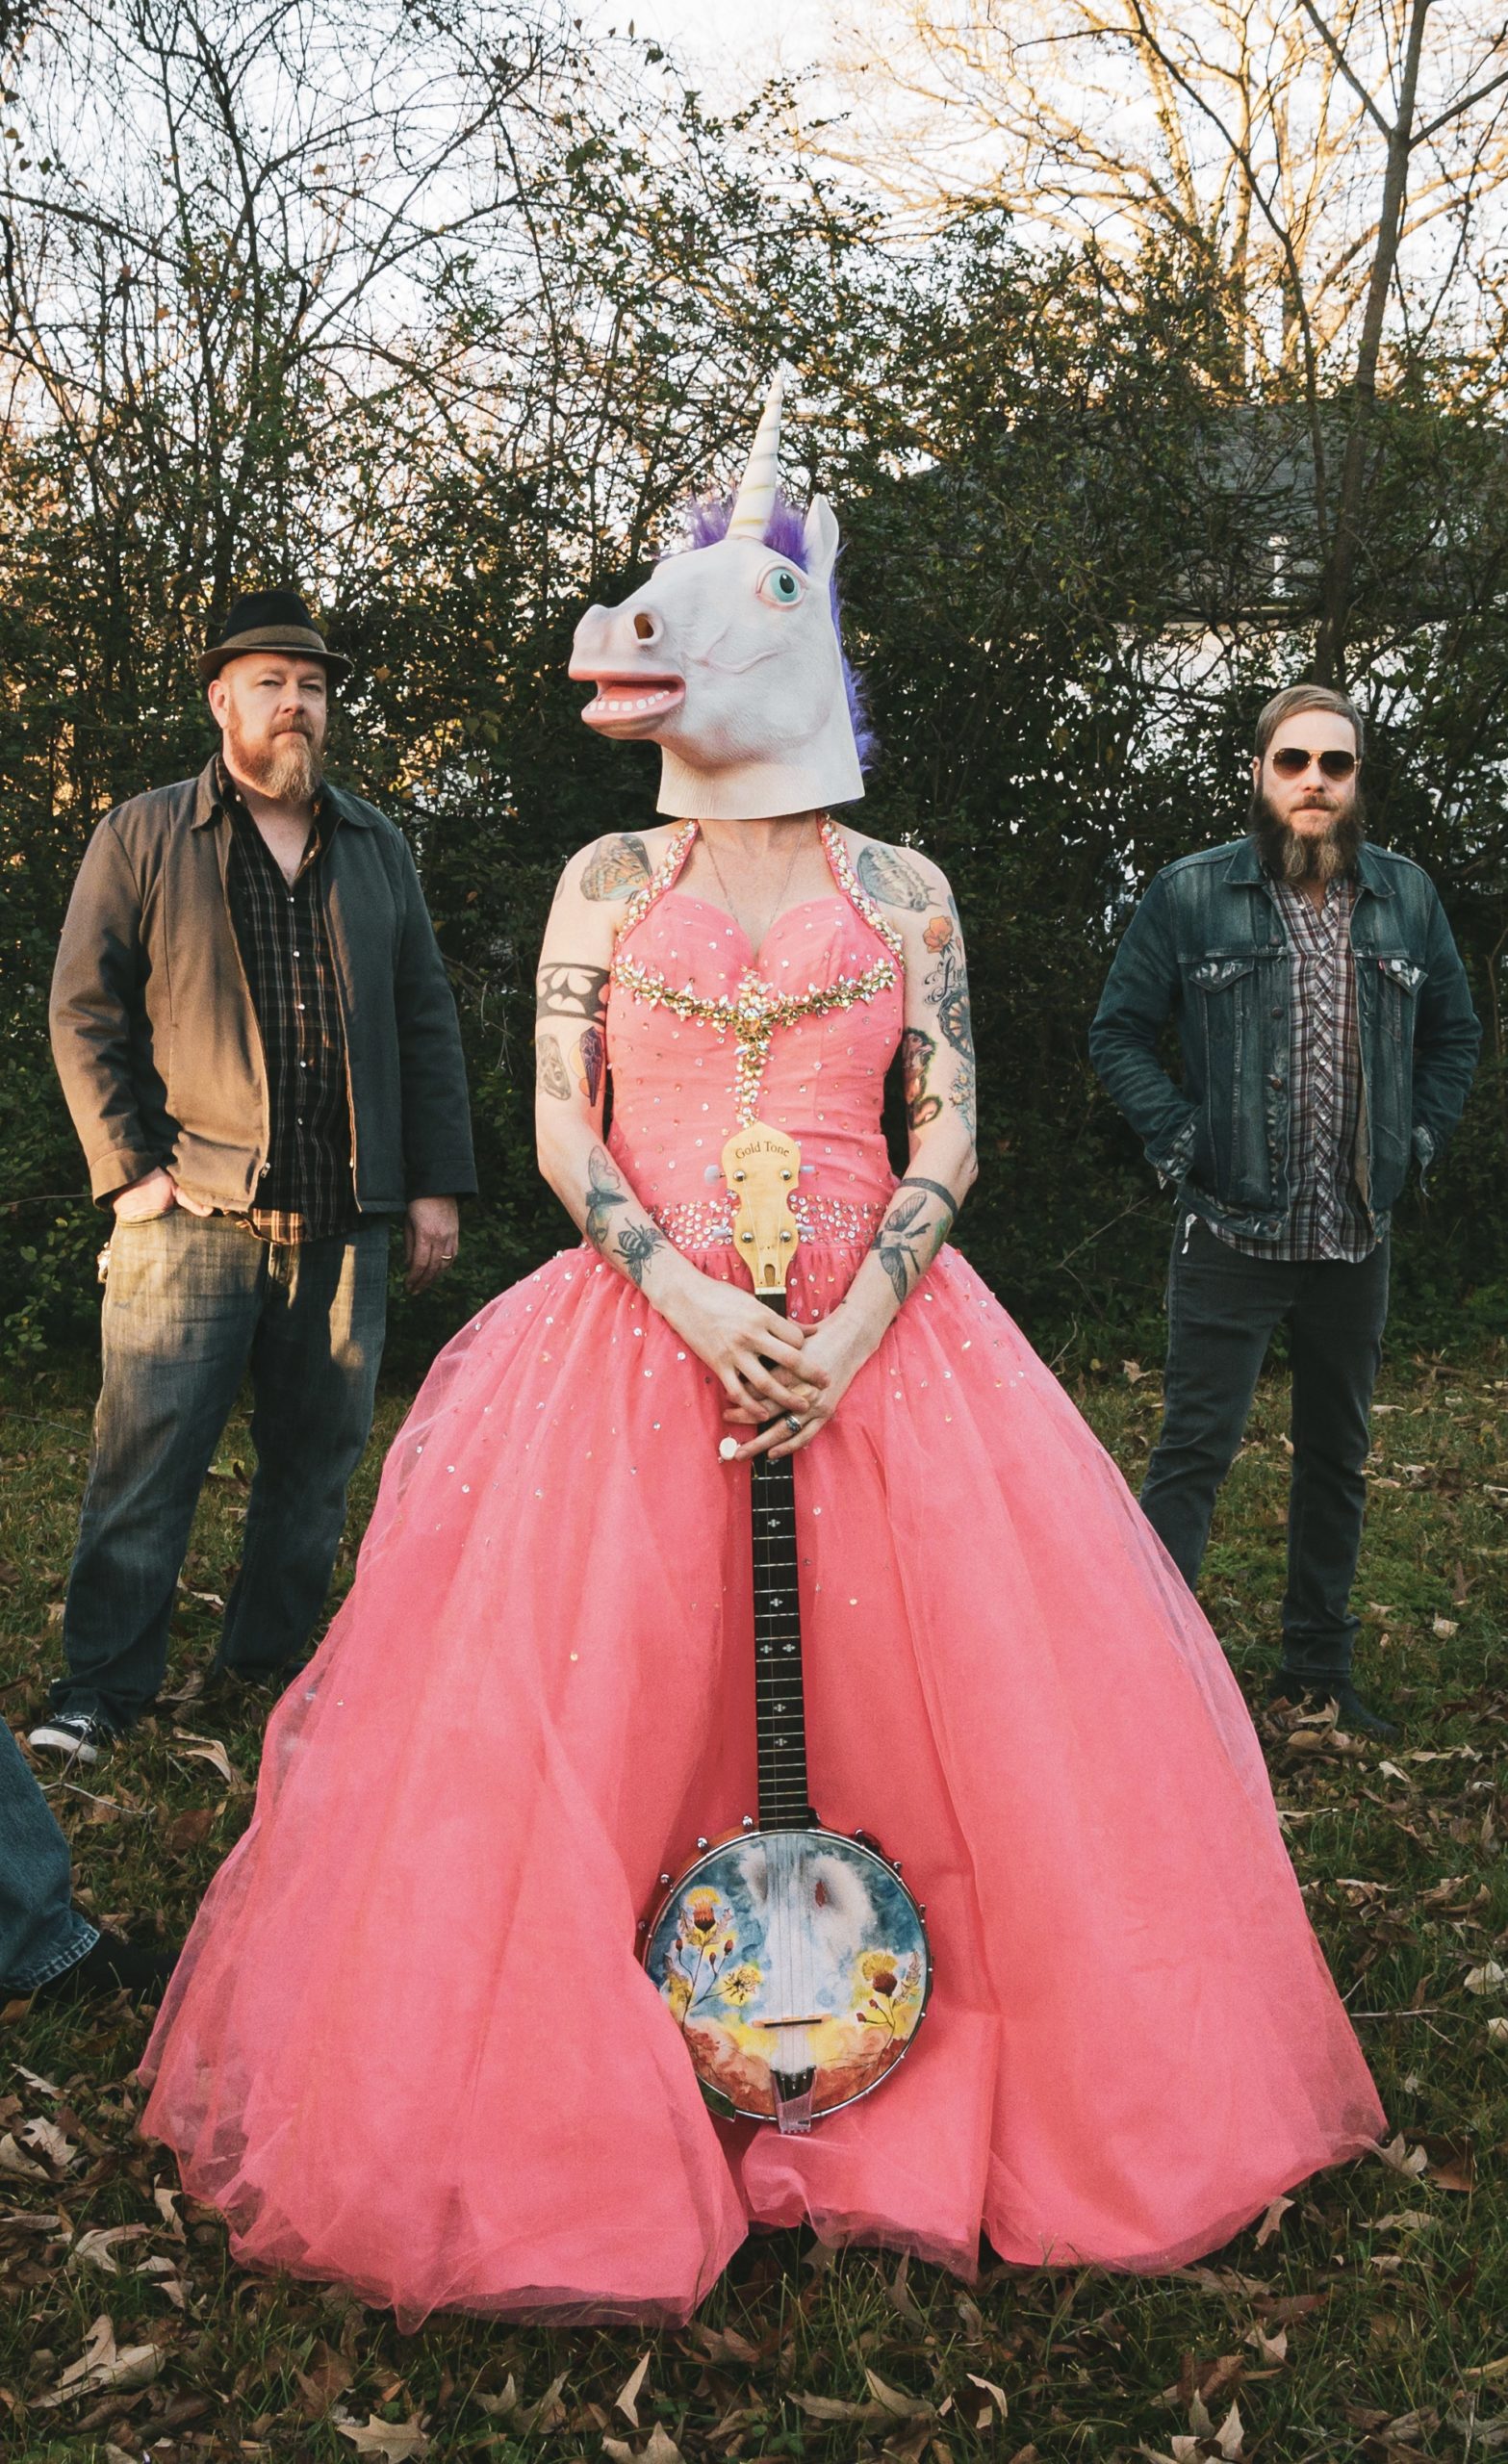 A frontwoman in a pink princess gown and unicorn mask holds a painted banjo. She is flanked on each side by her 2 bearded male bandmates in flannel shirts and jeans. This is Heather and the Possumden.